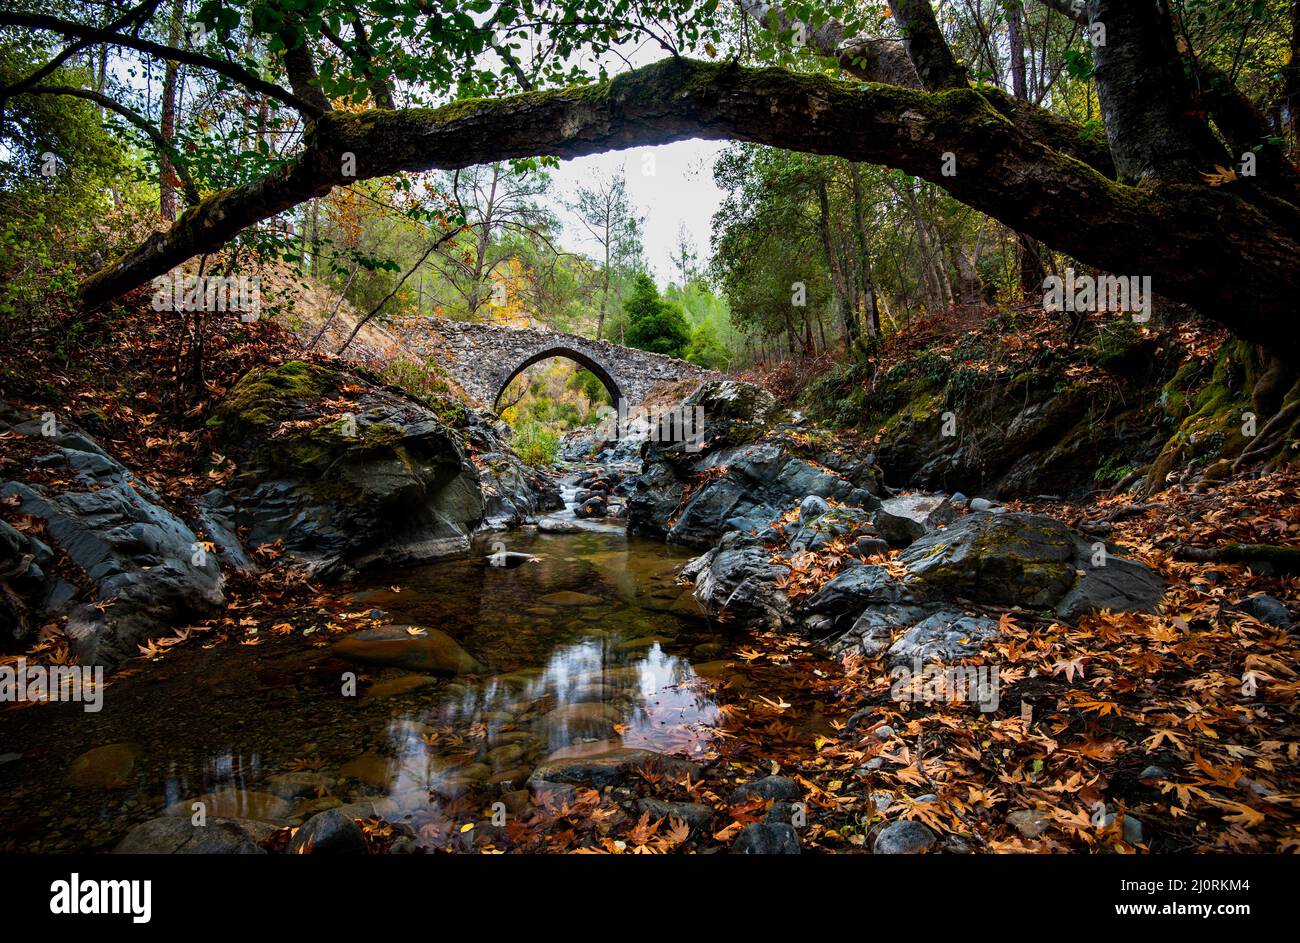 Medieval stoned bridge water flowing in the river in autumn. Stock Photo